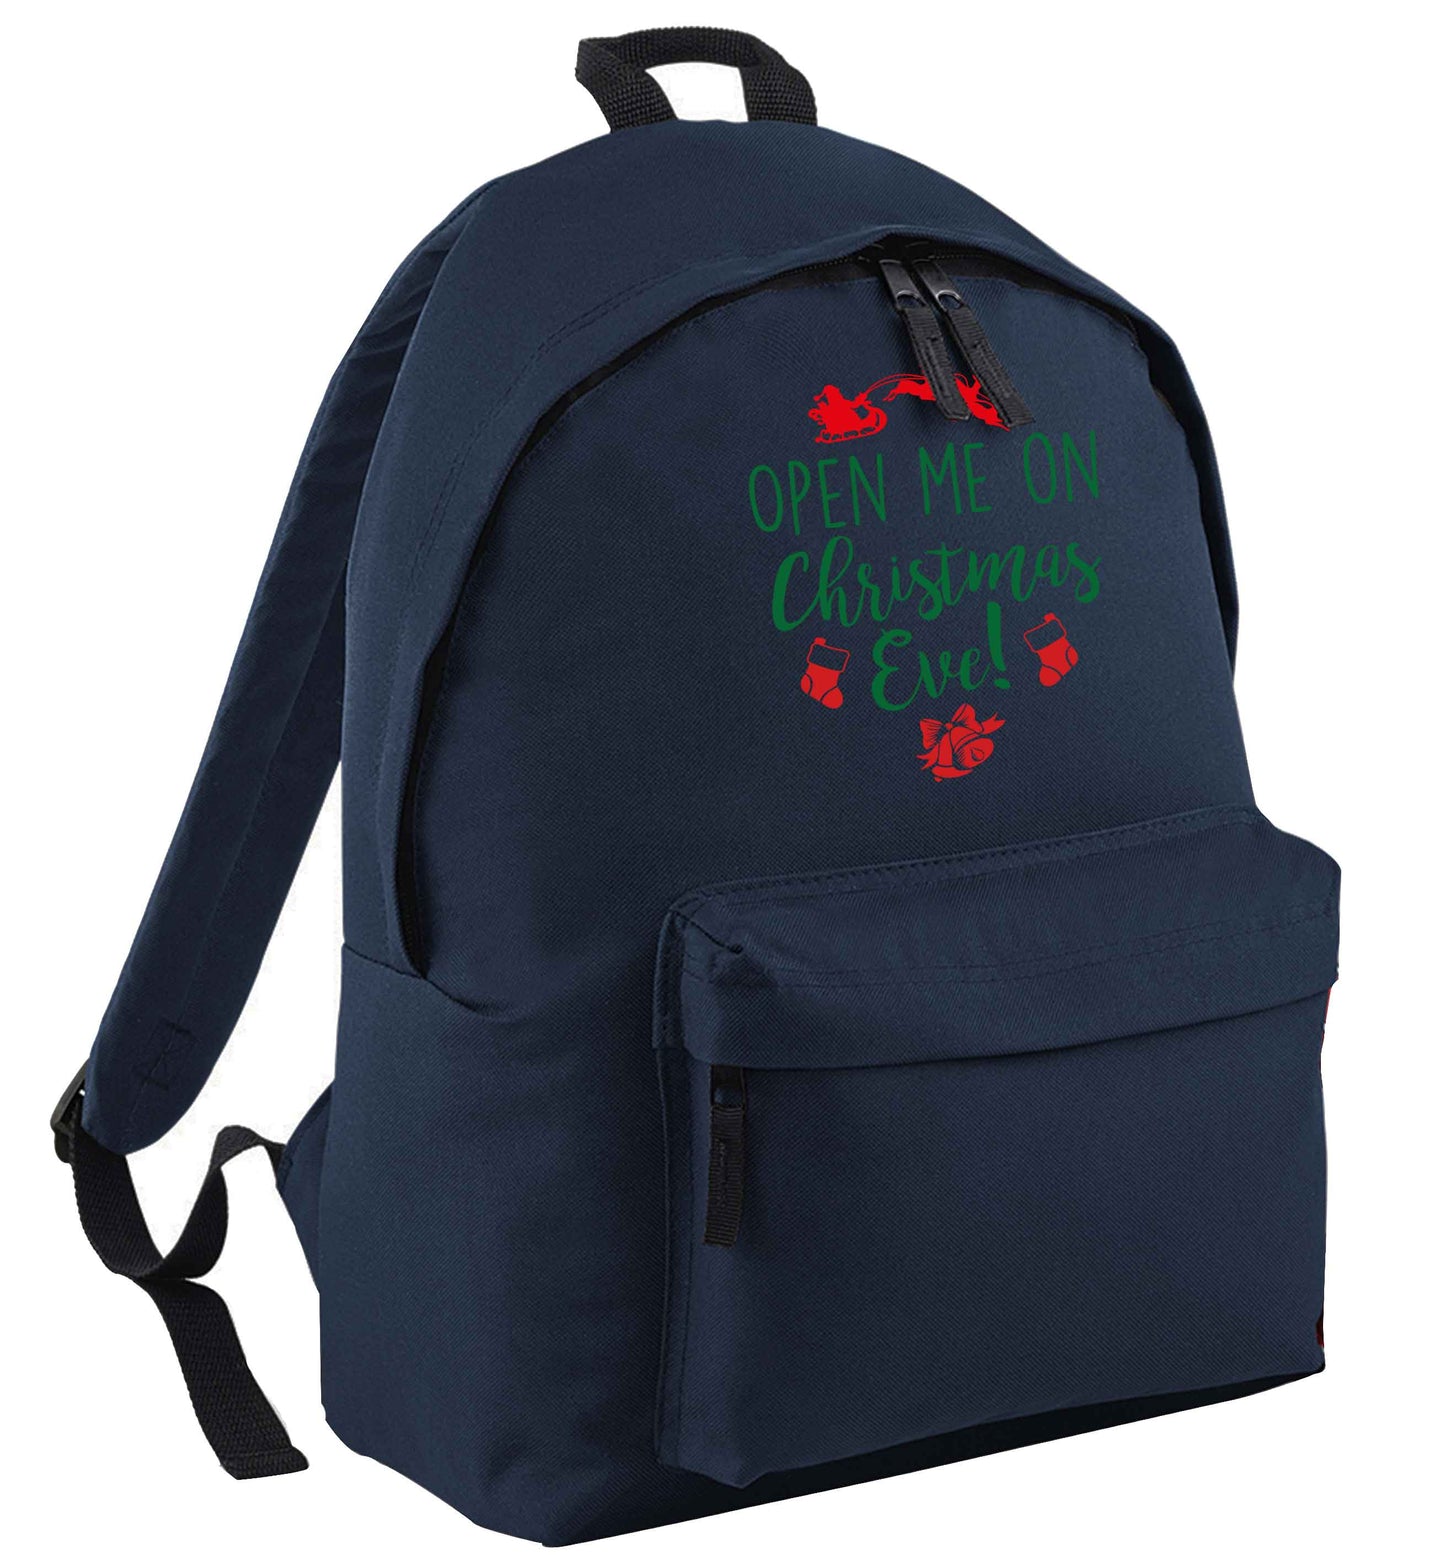 Open me on Christmas Day navy adults backpack